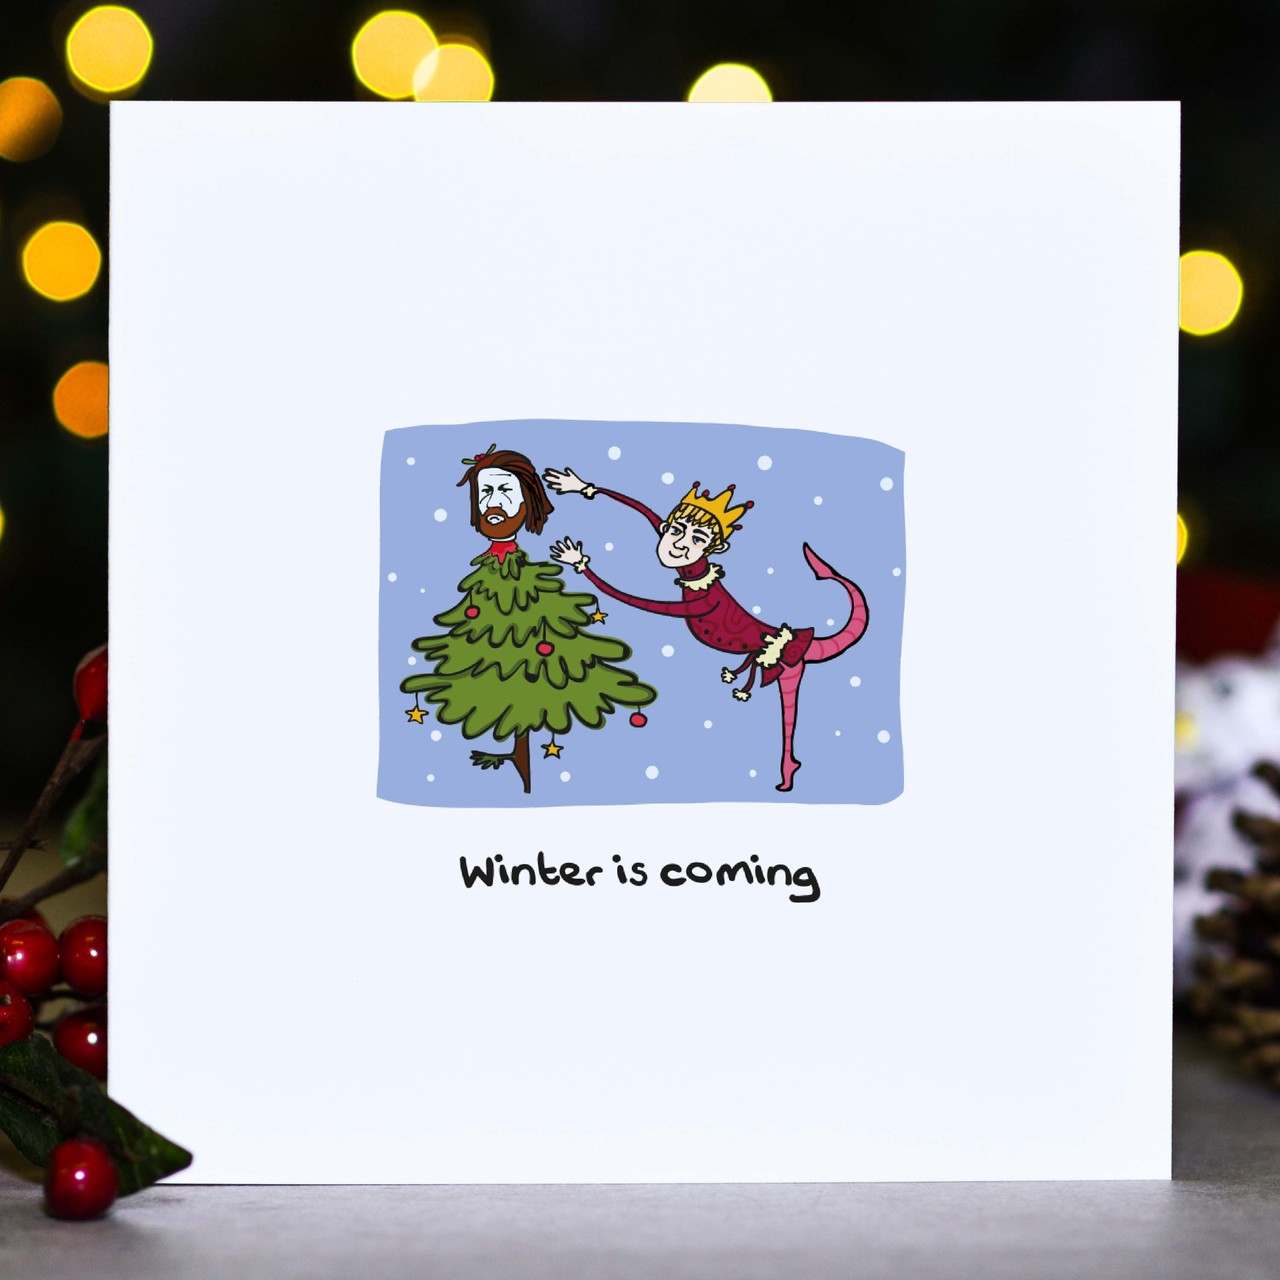 Winter is coming – Ned GOT Christmas Card